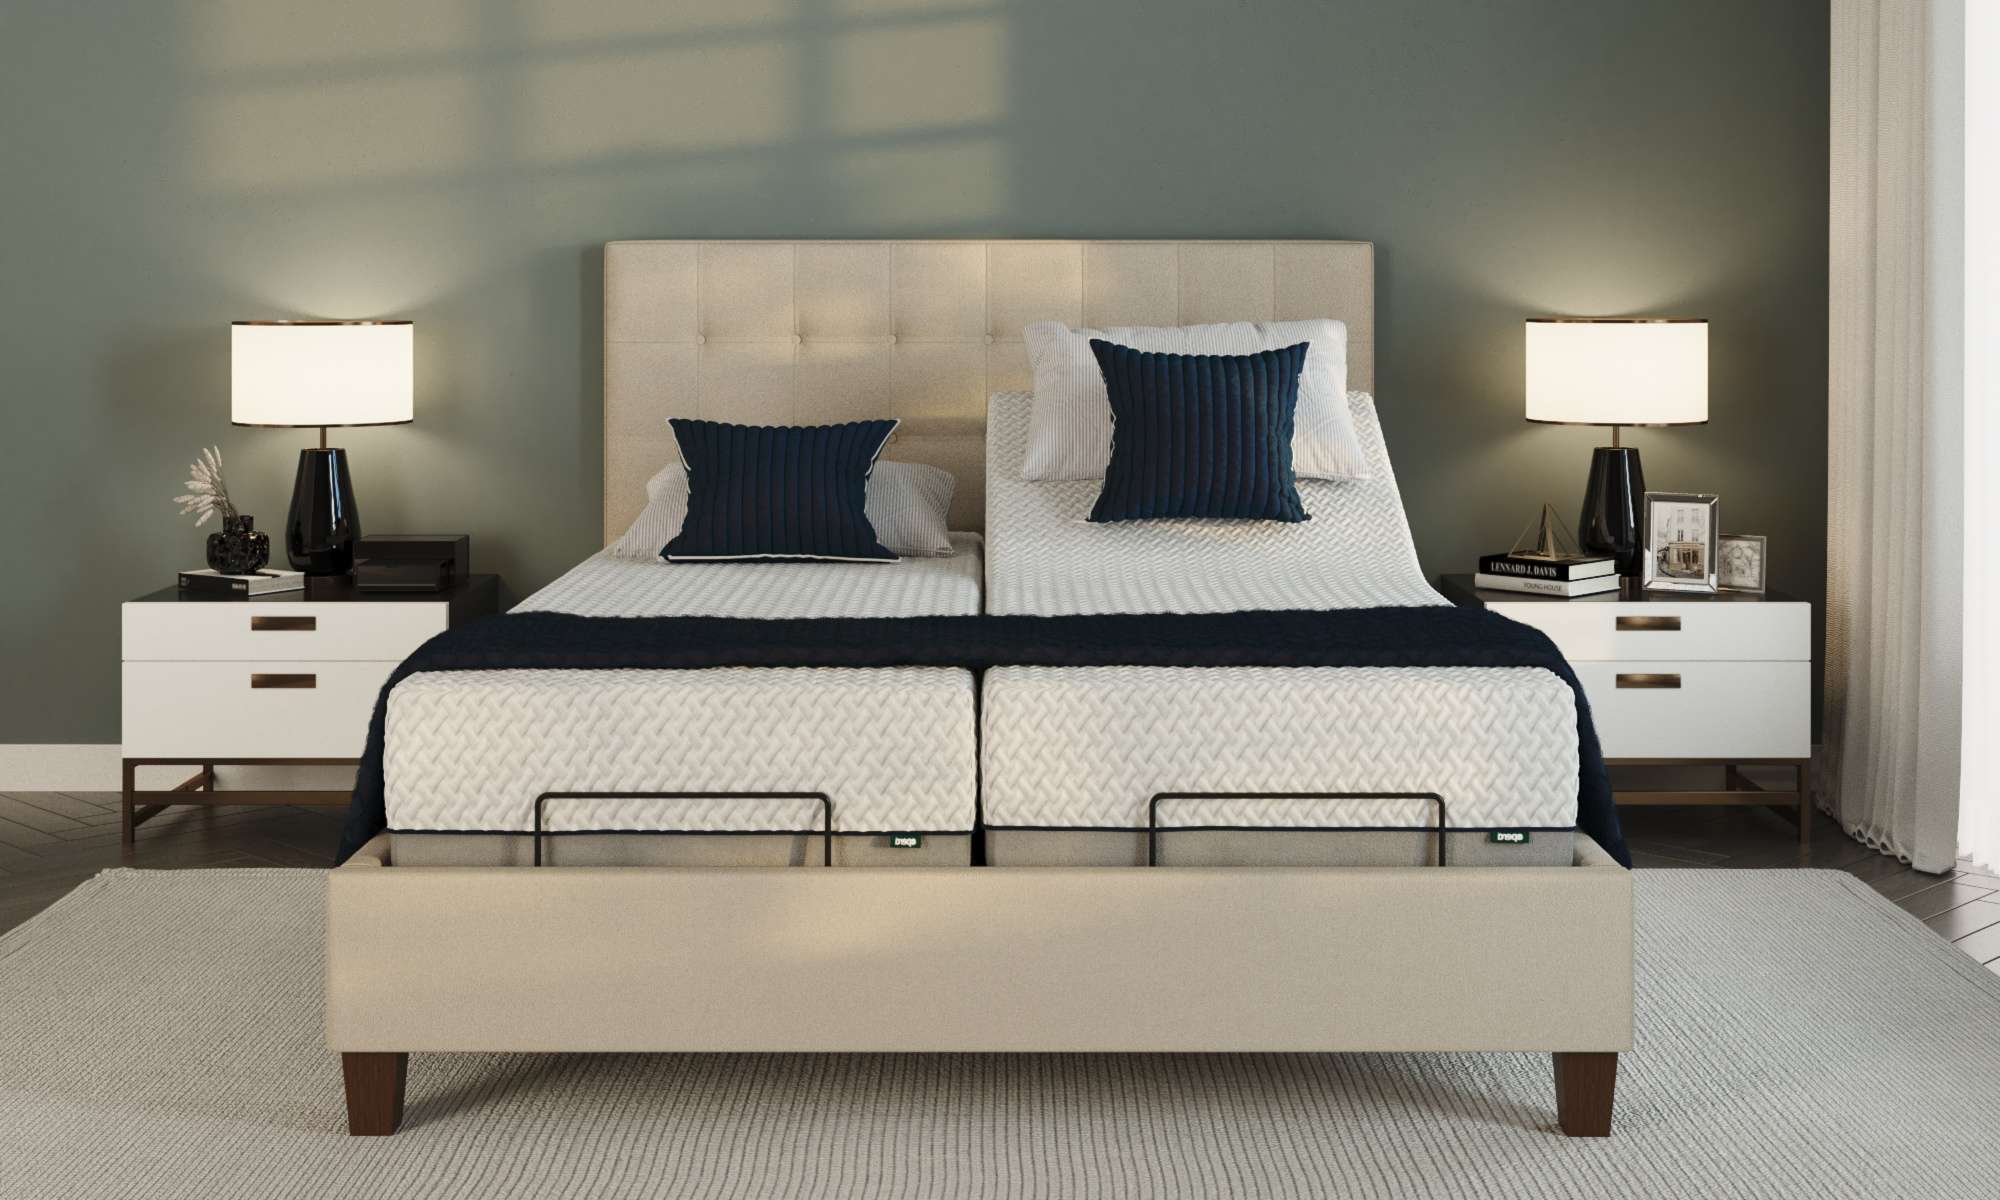 Lifestyle shot of a double electric adjustable bed in a carpeted bedroom.